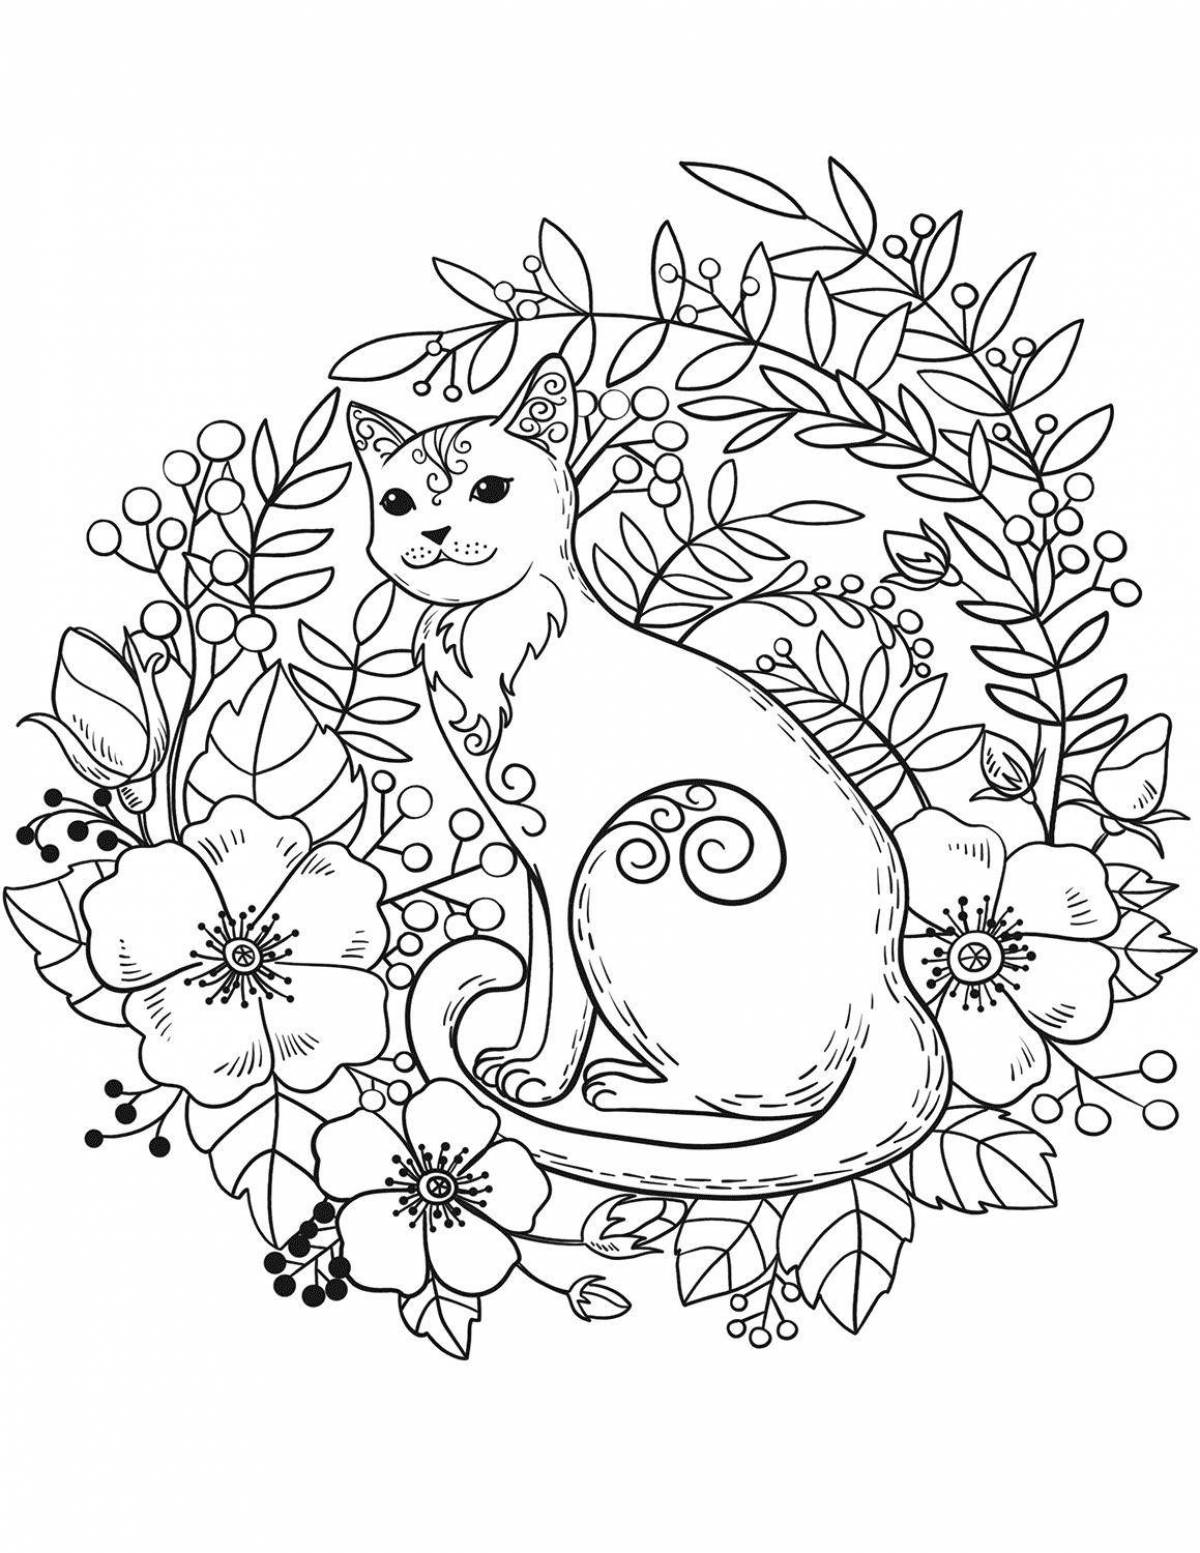 Adorable magical cats coloring pages